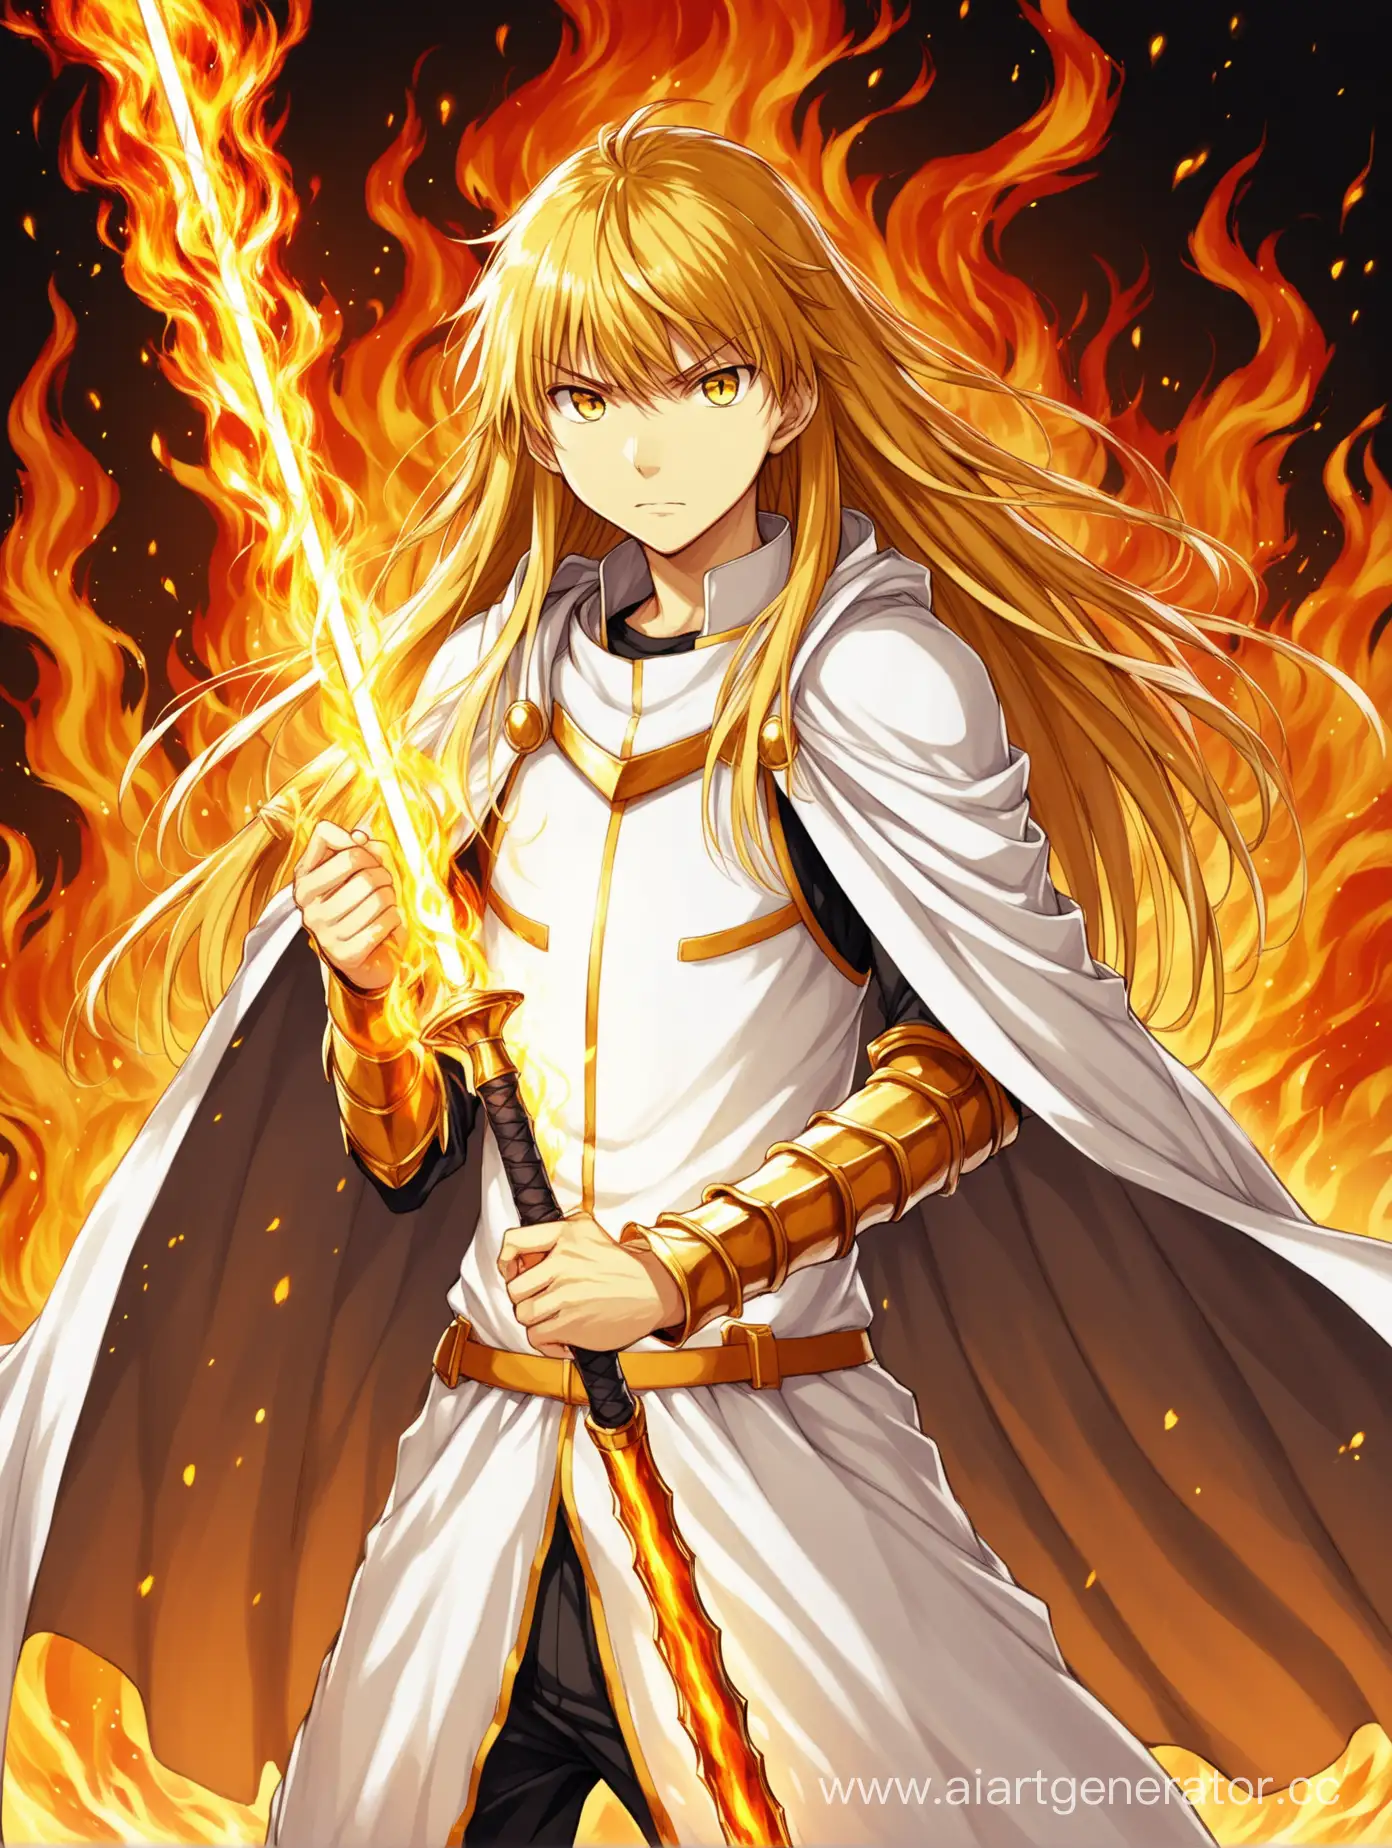 Young-Teenage-Boy-Aiwass-Wielding-Sword-and-Fire-Staff-in-Fiery-Costume